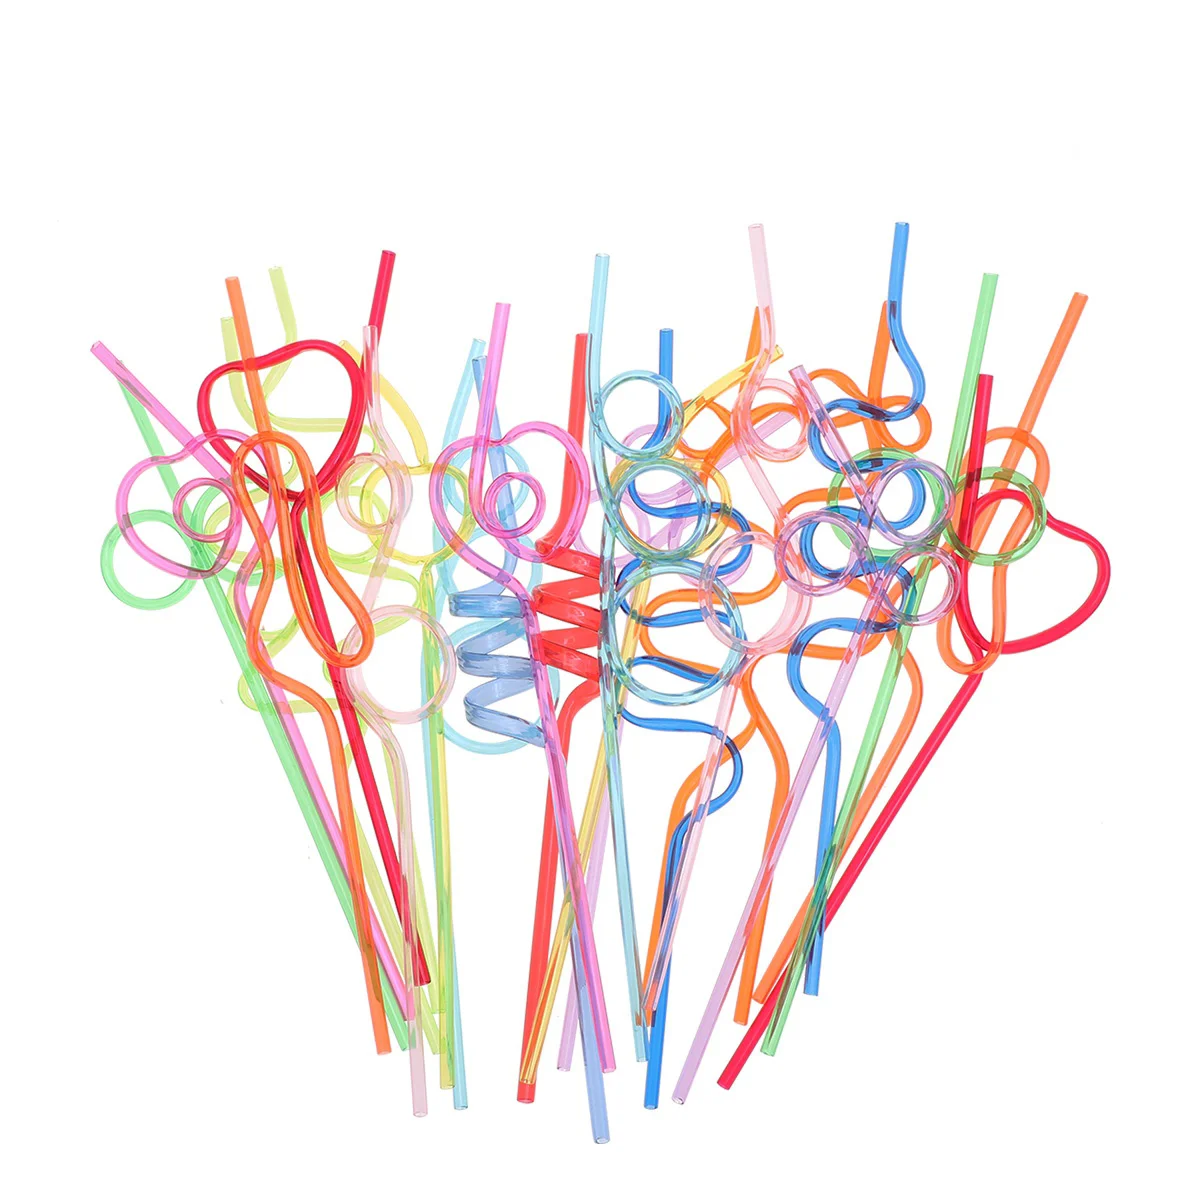 

24 Pcs Bent Pipe Drinking Straws Plastic Disposable Pipettes Party Crystal Recyclable